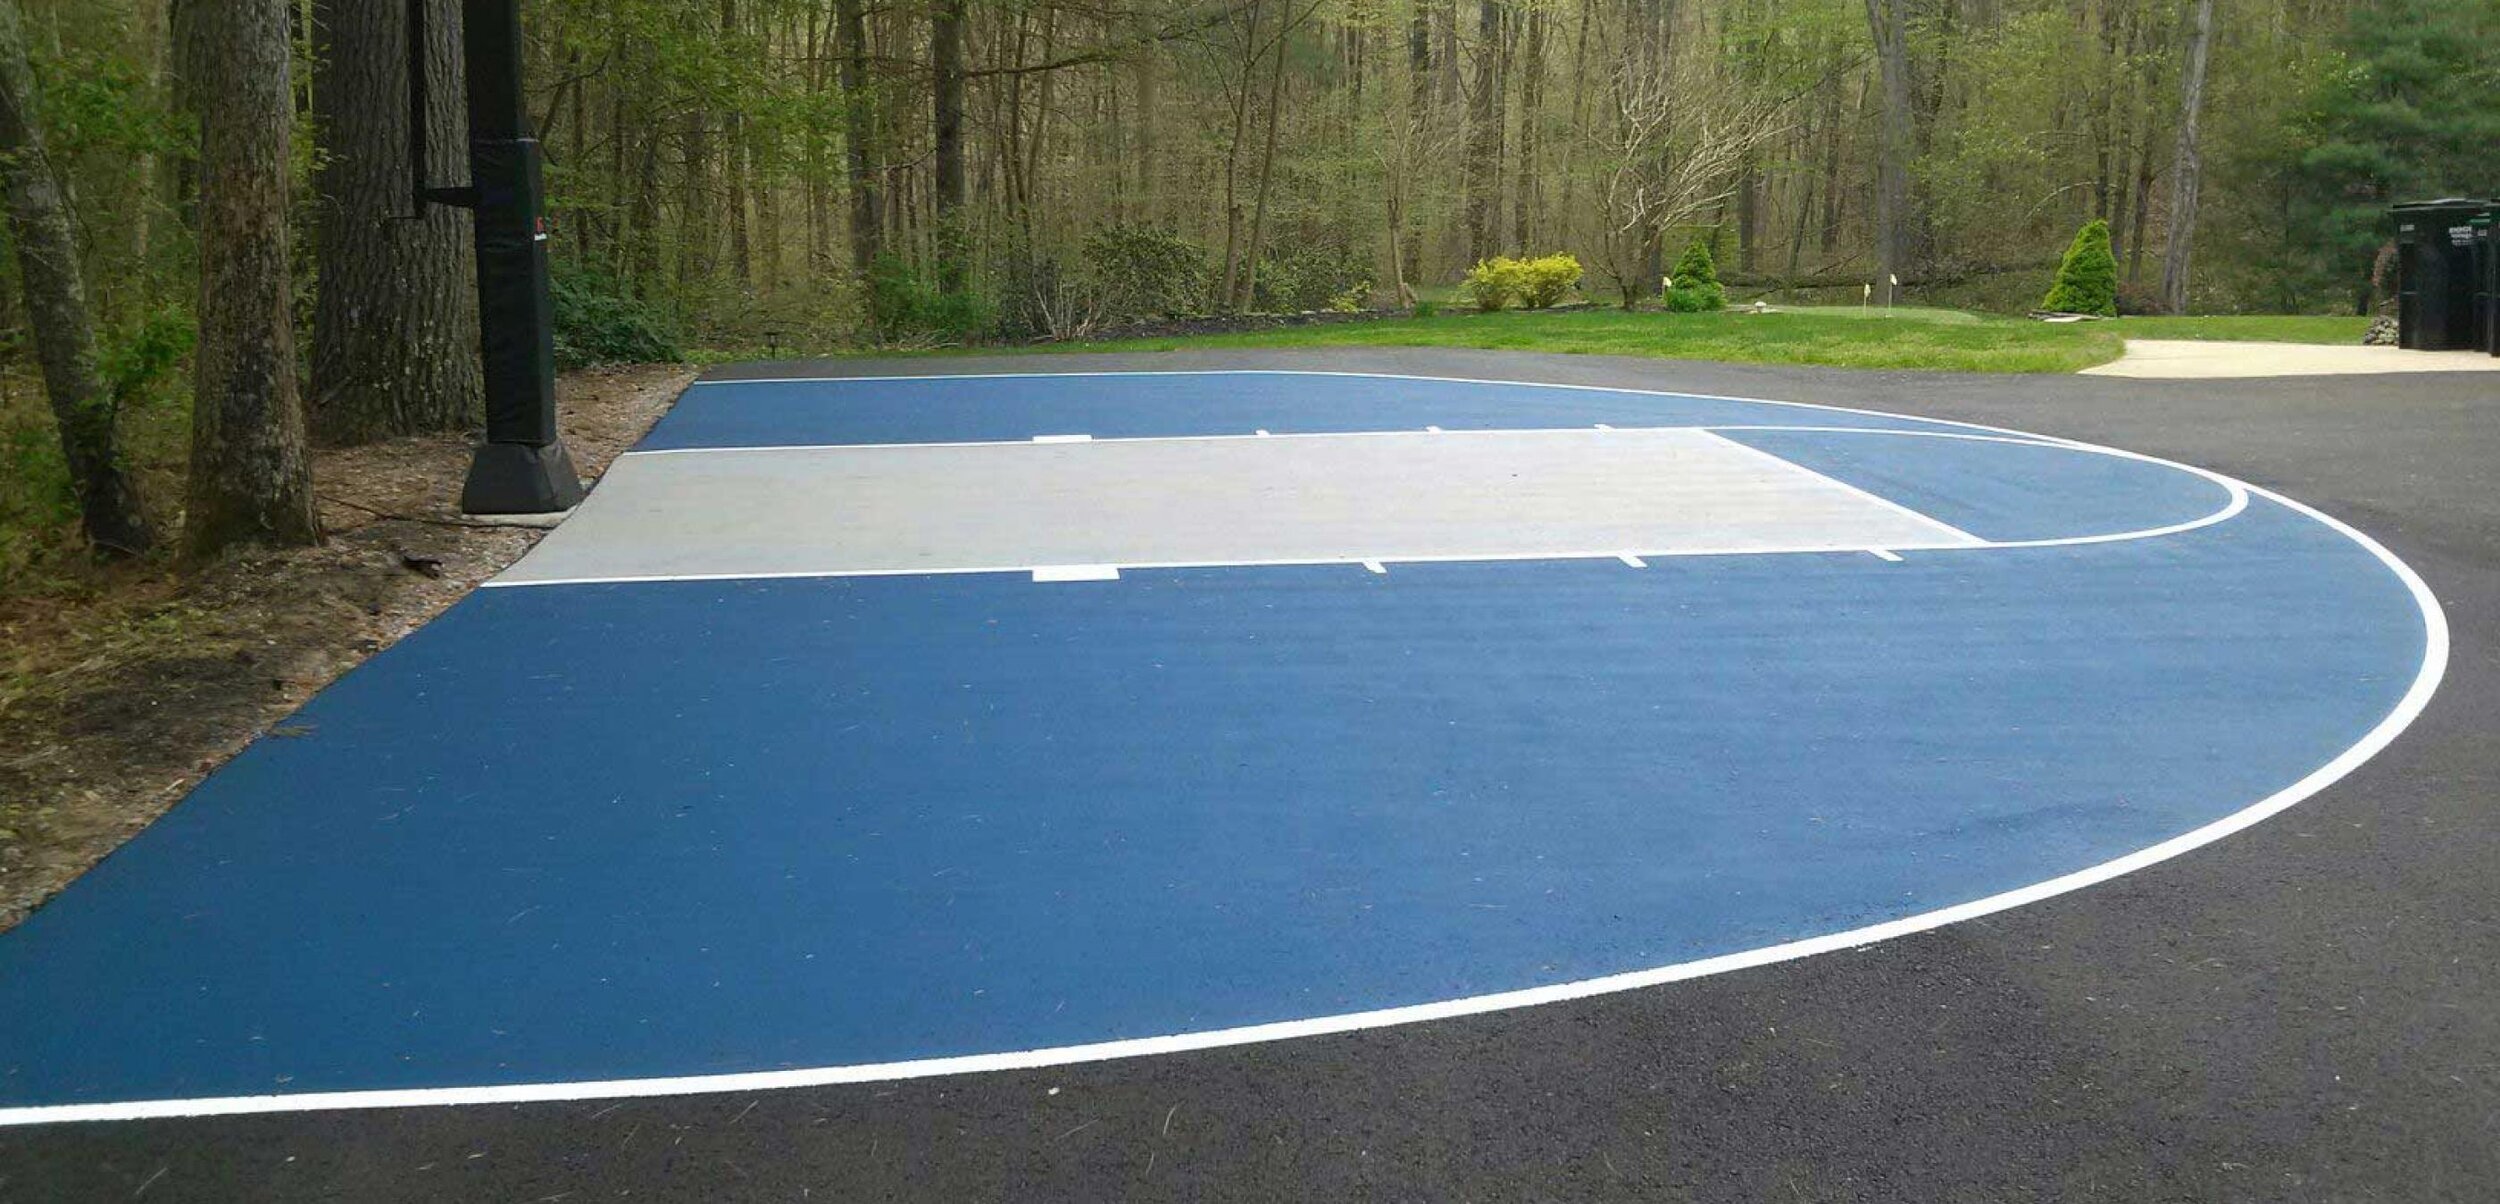 Court Re-Sufacing and Line Painting